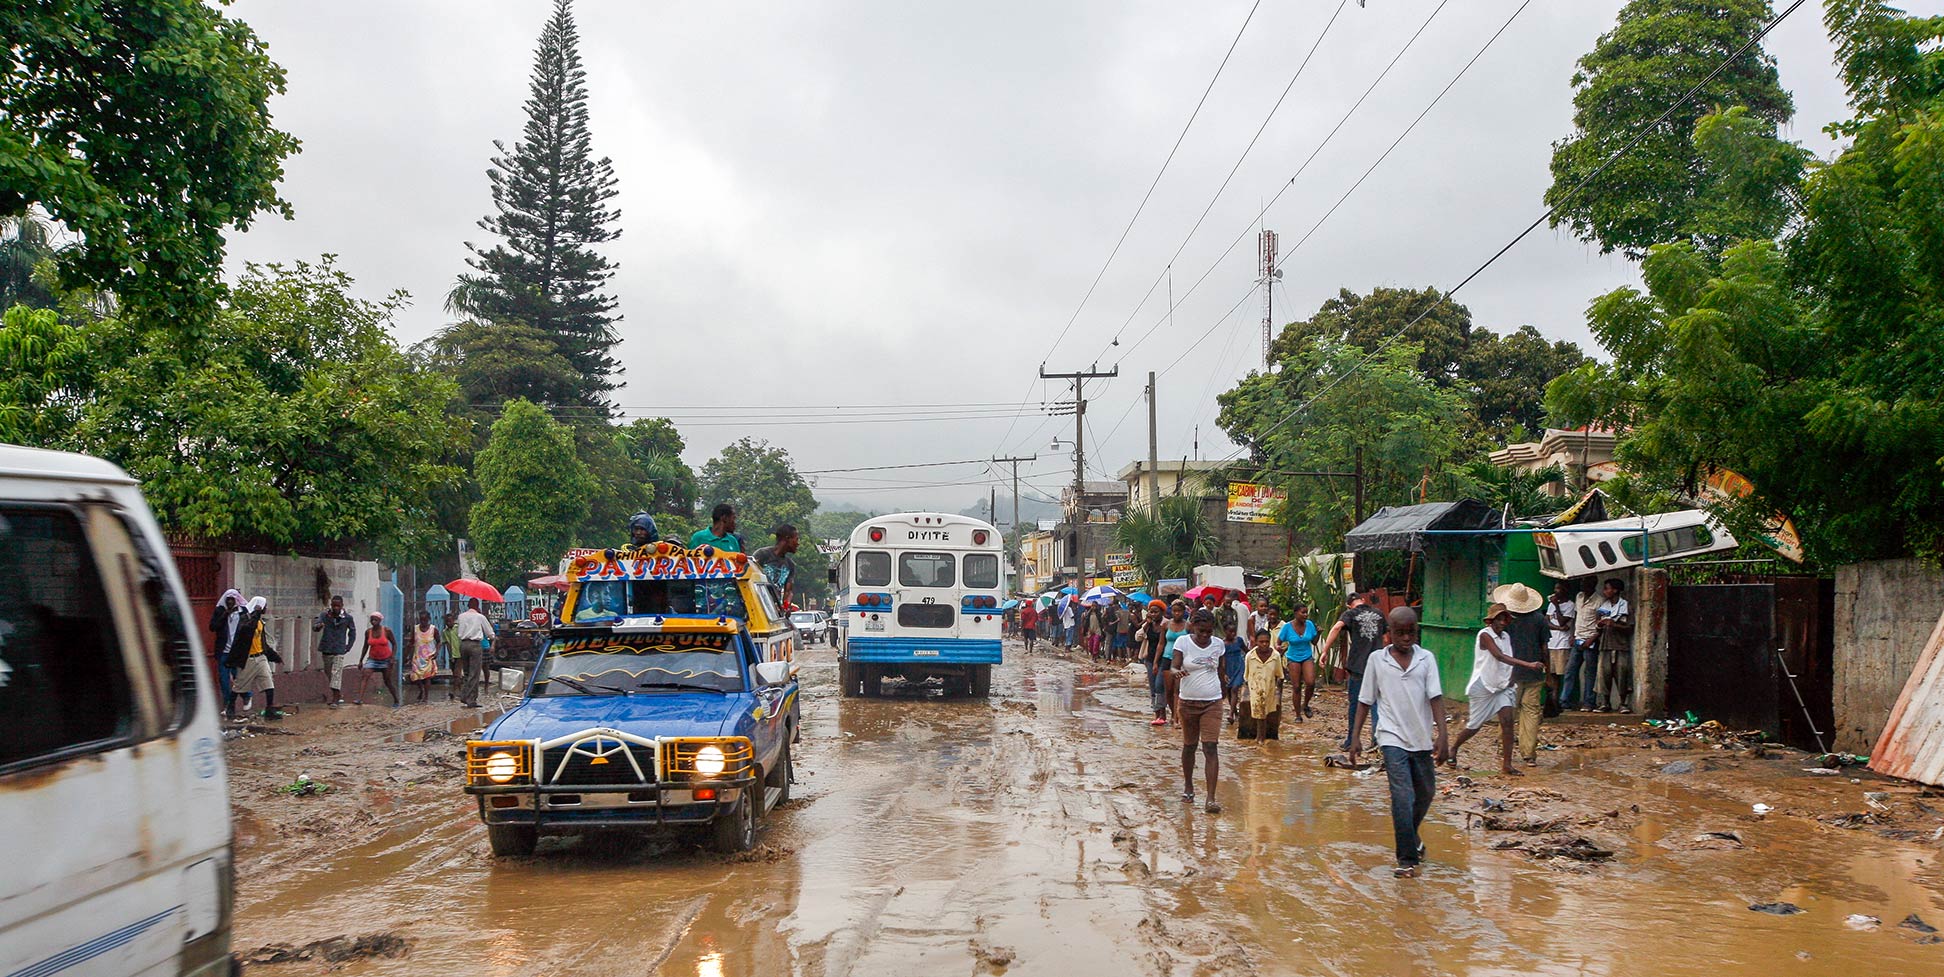 A road in Cap Haitien after heavy thunderstorms with flooding.